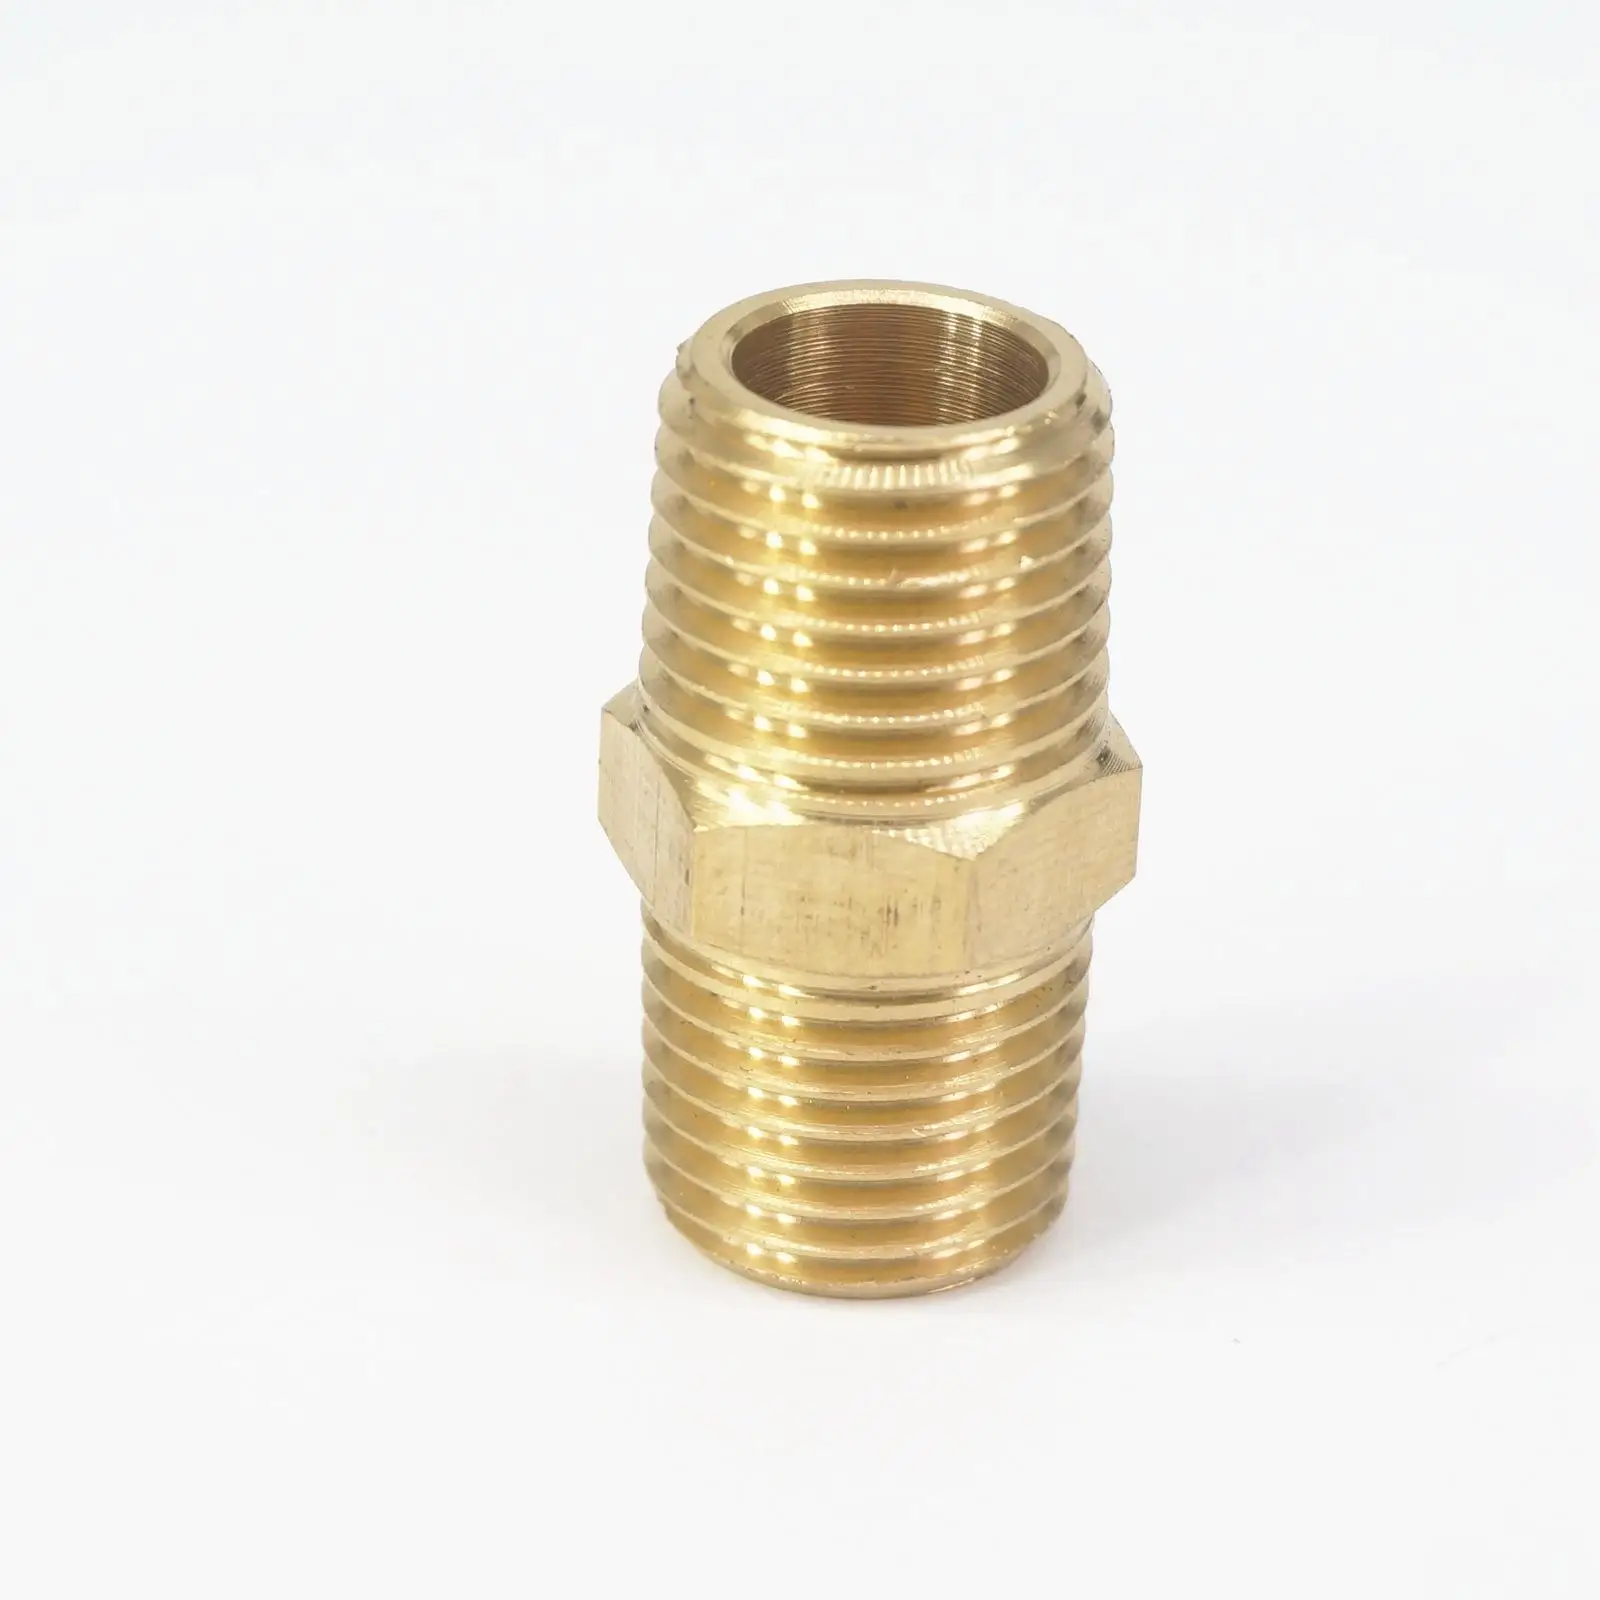 1/4" X 1/4" Brass Nipple Pipe Fittings Equal Adapter Union NPT Male Threaded ... 